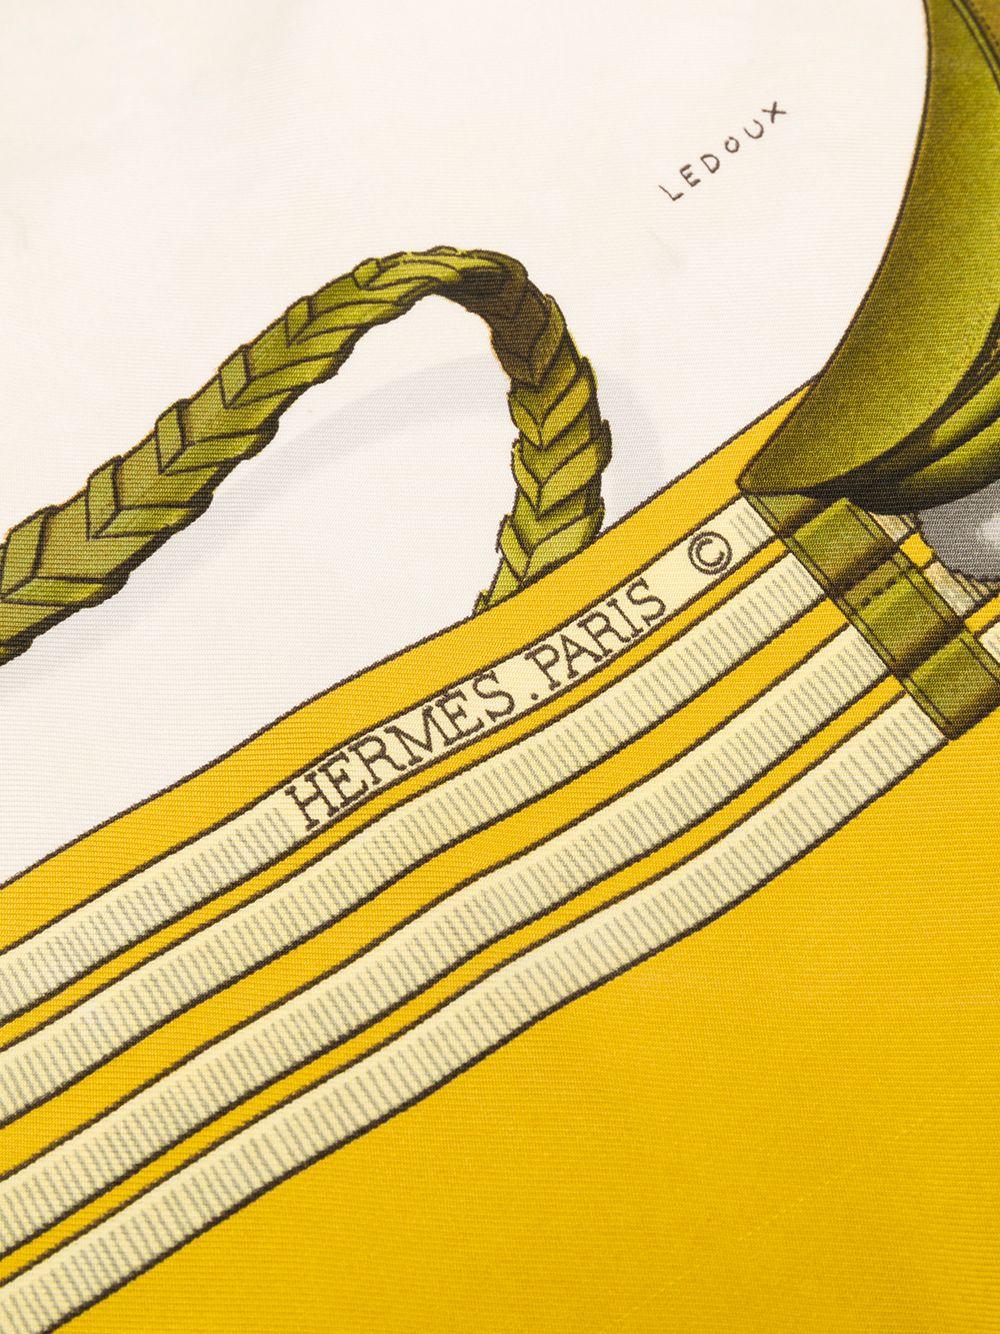 Hermes silk scarf Jumping by Philippe Ledoux featuring a yellow border, a horse scene.
In excellent vintage condition. Made in France.
35,4in. (90cm)  X 35,4in. (90cm)
We guarantee you will receive this  iconic item as described and showed on